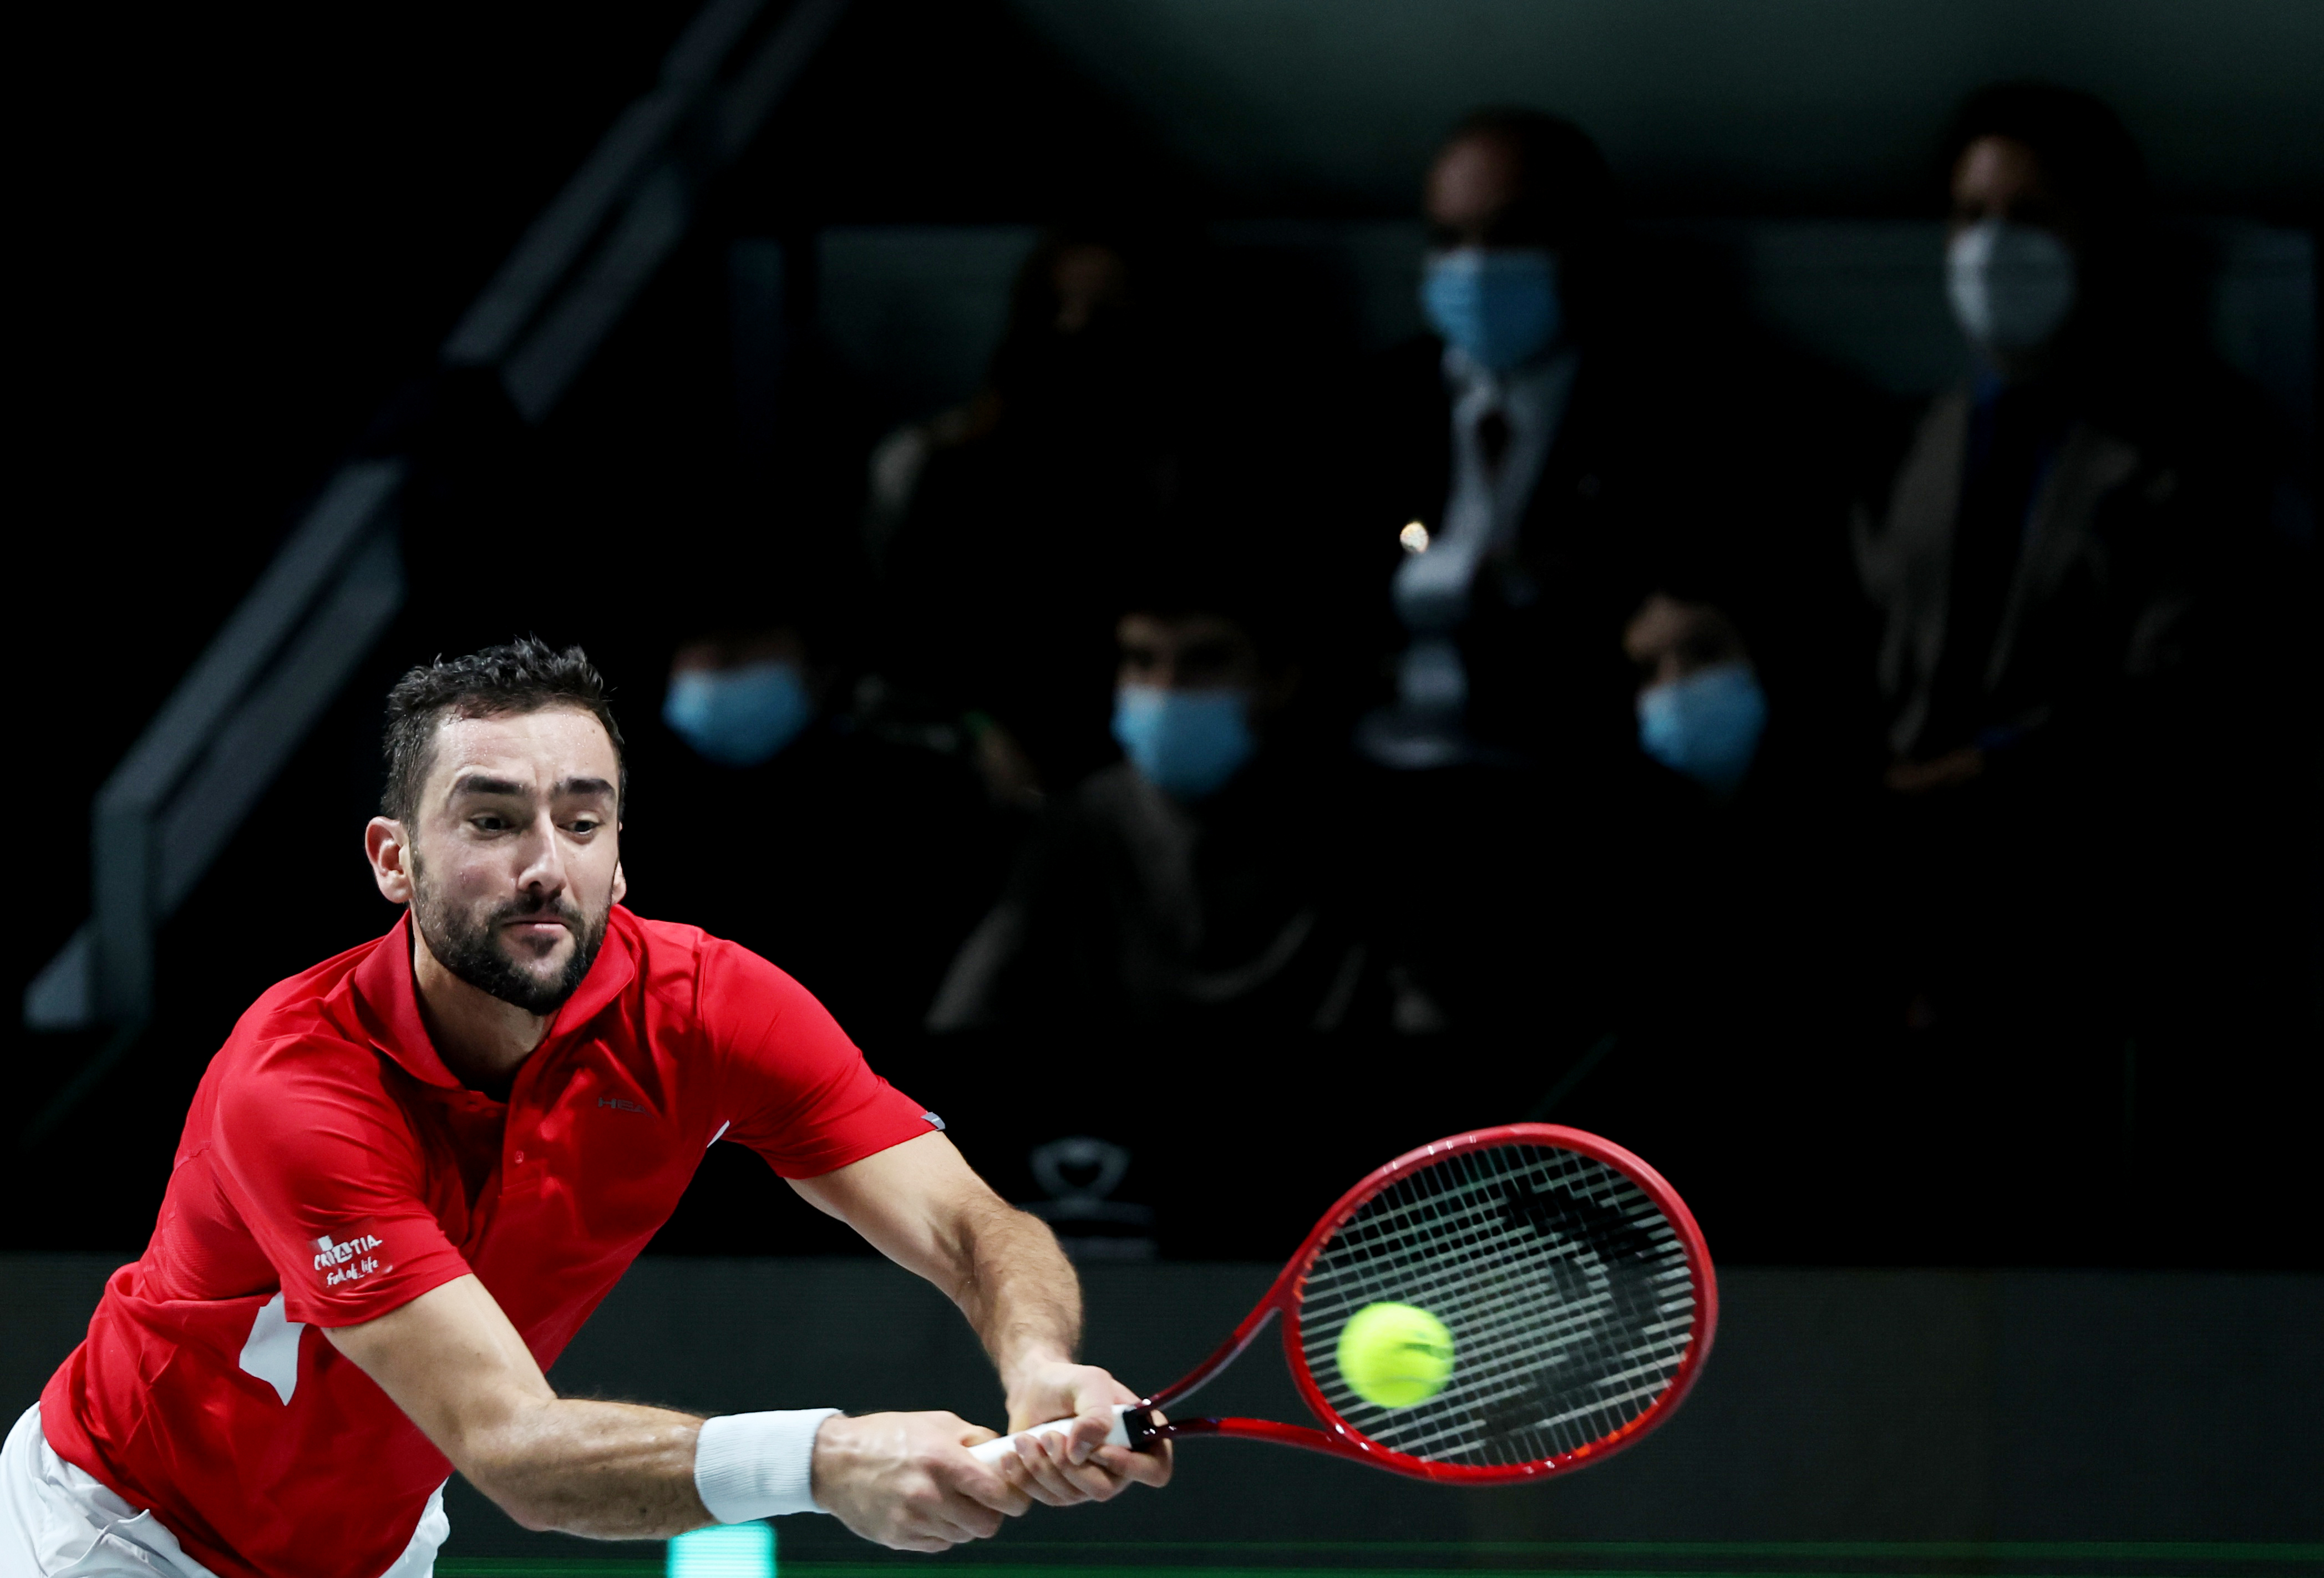 Tennis - Davis Cup Finals - Madrid Arena, Madrid, Spain - December 5, 2021 Croatia's Marin Cilic in action during his final singles match against Russian Tennis Federation's Daniil Medvedev REUTERS/Sergio Perez/File Photo